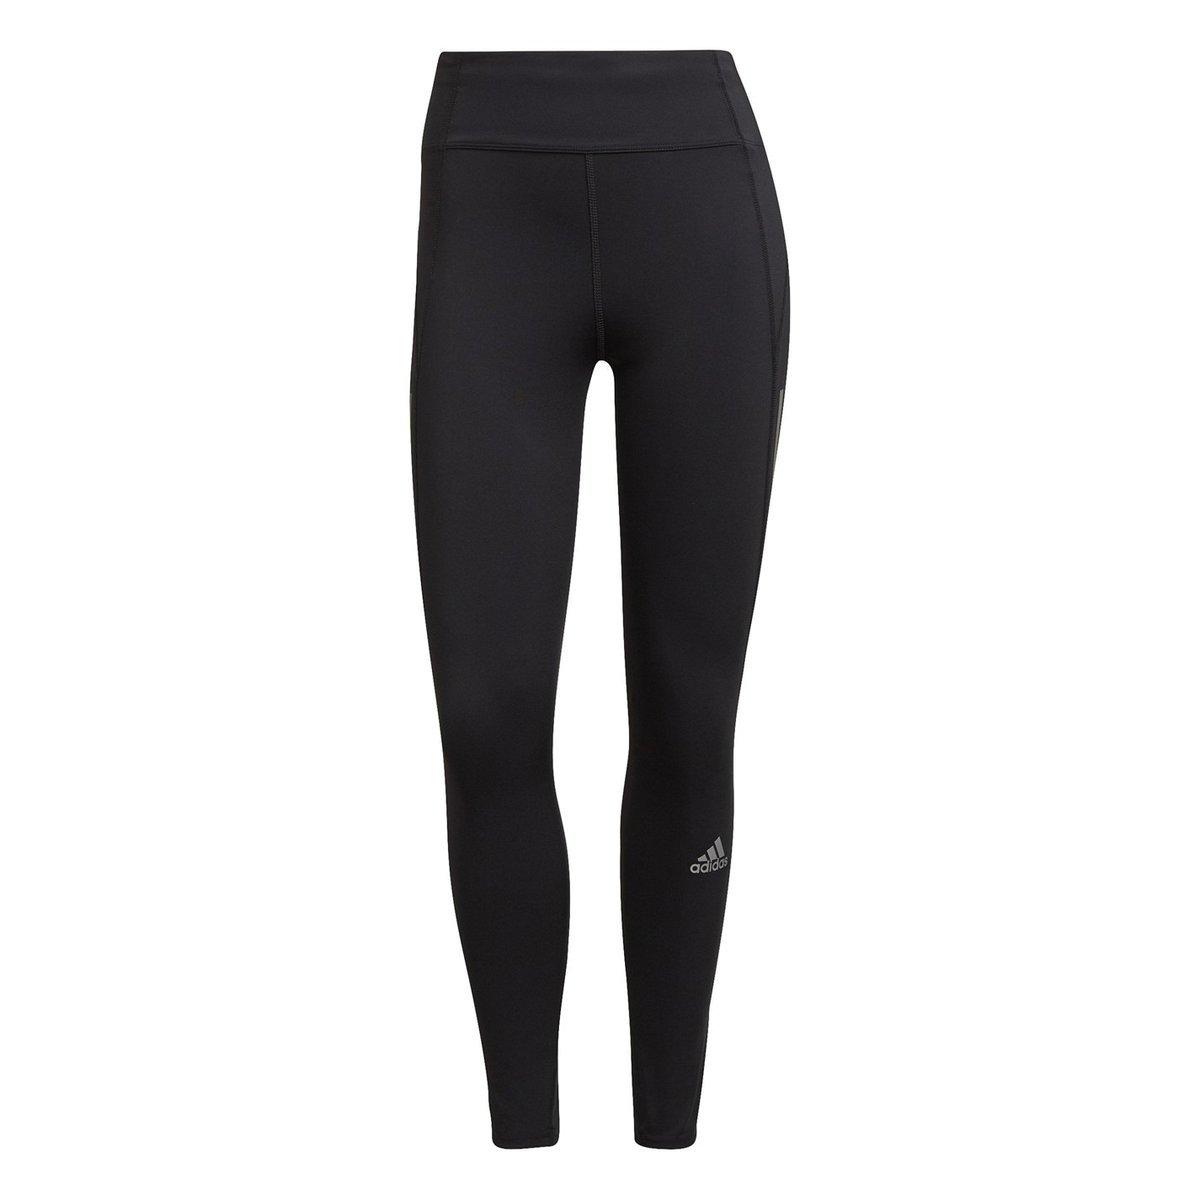 Buy Adidas Adults Techfit Allover Print Training Long Tights on